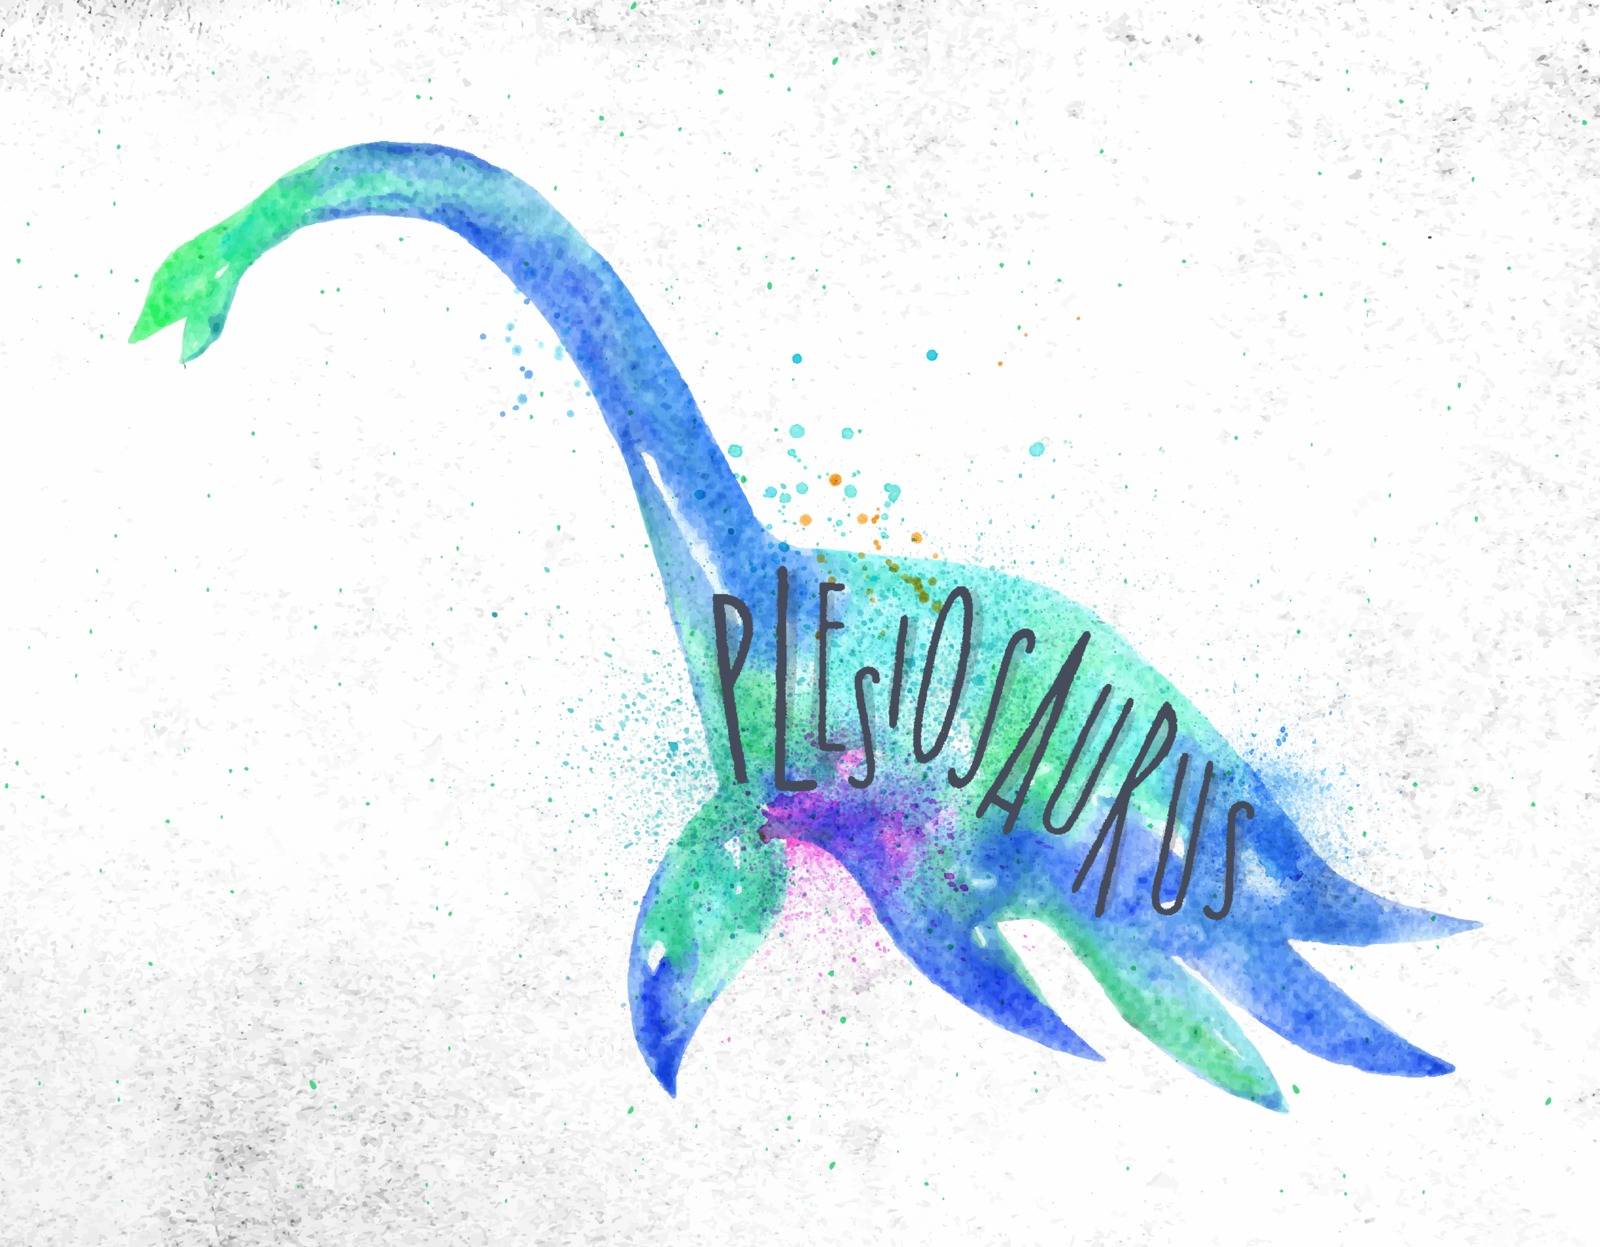 Dinosaur poster lettering plesiosaurus drawing with color, vivid paint on dirty paper background.